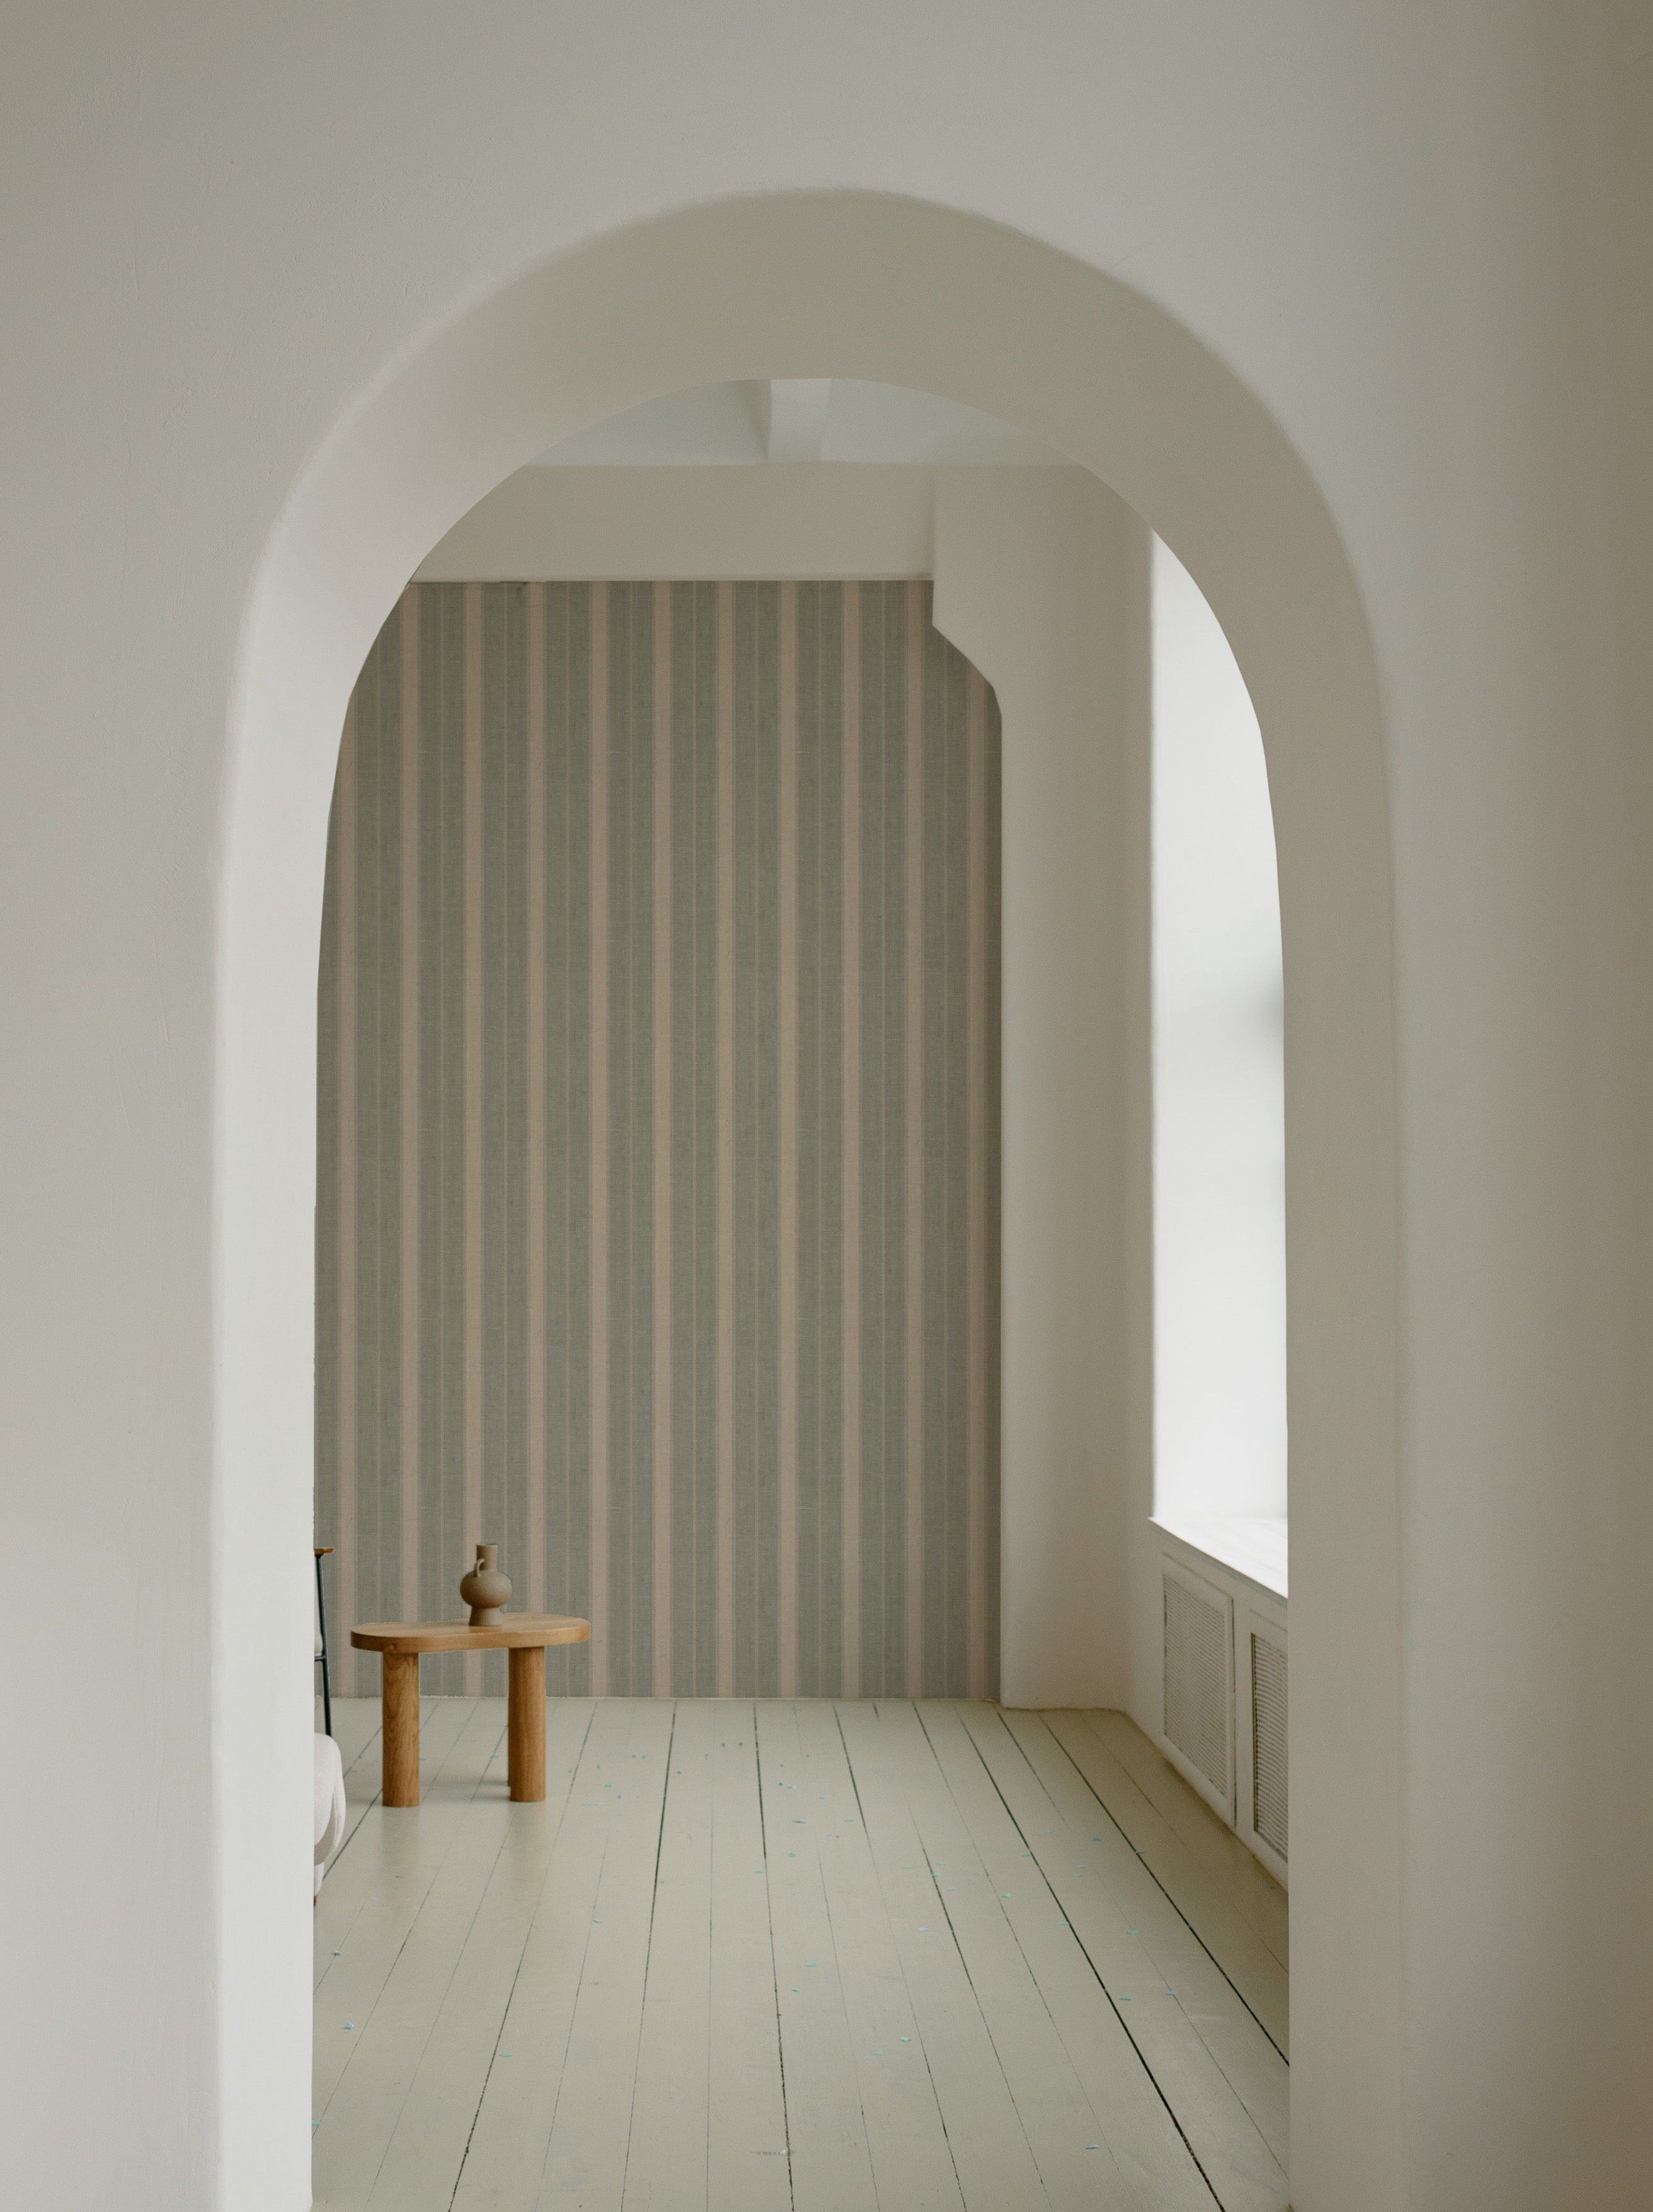 A view through an arched doorway showing a wall adorned with 'Burlap Striped Wallpaper', creating a sense of depth and texture with its muted stripes, paired with a minimalist wooden stool